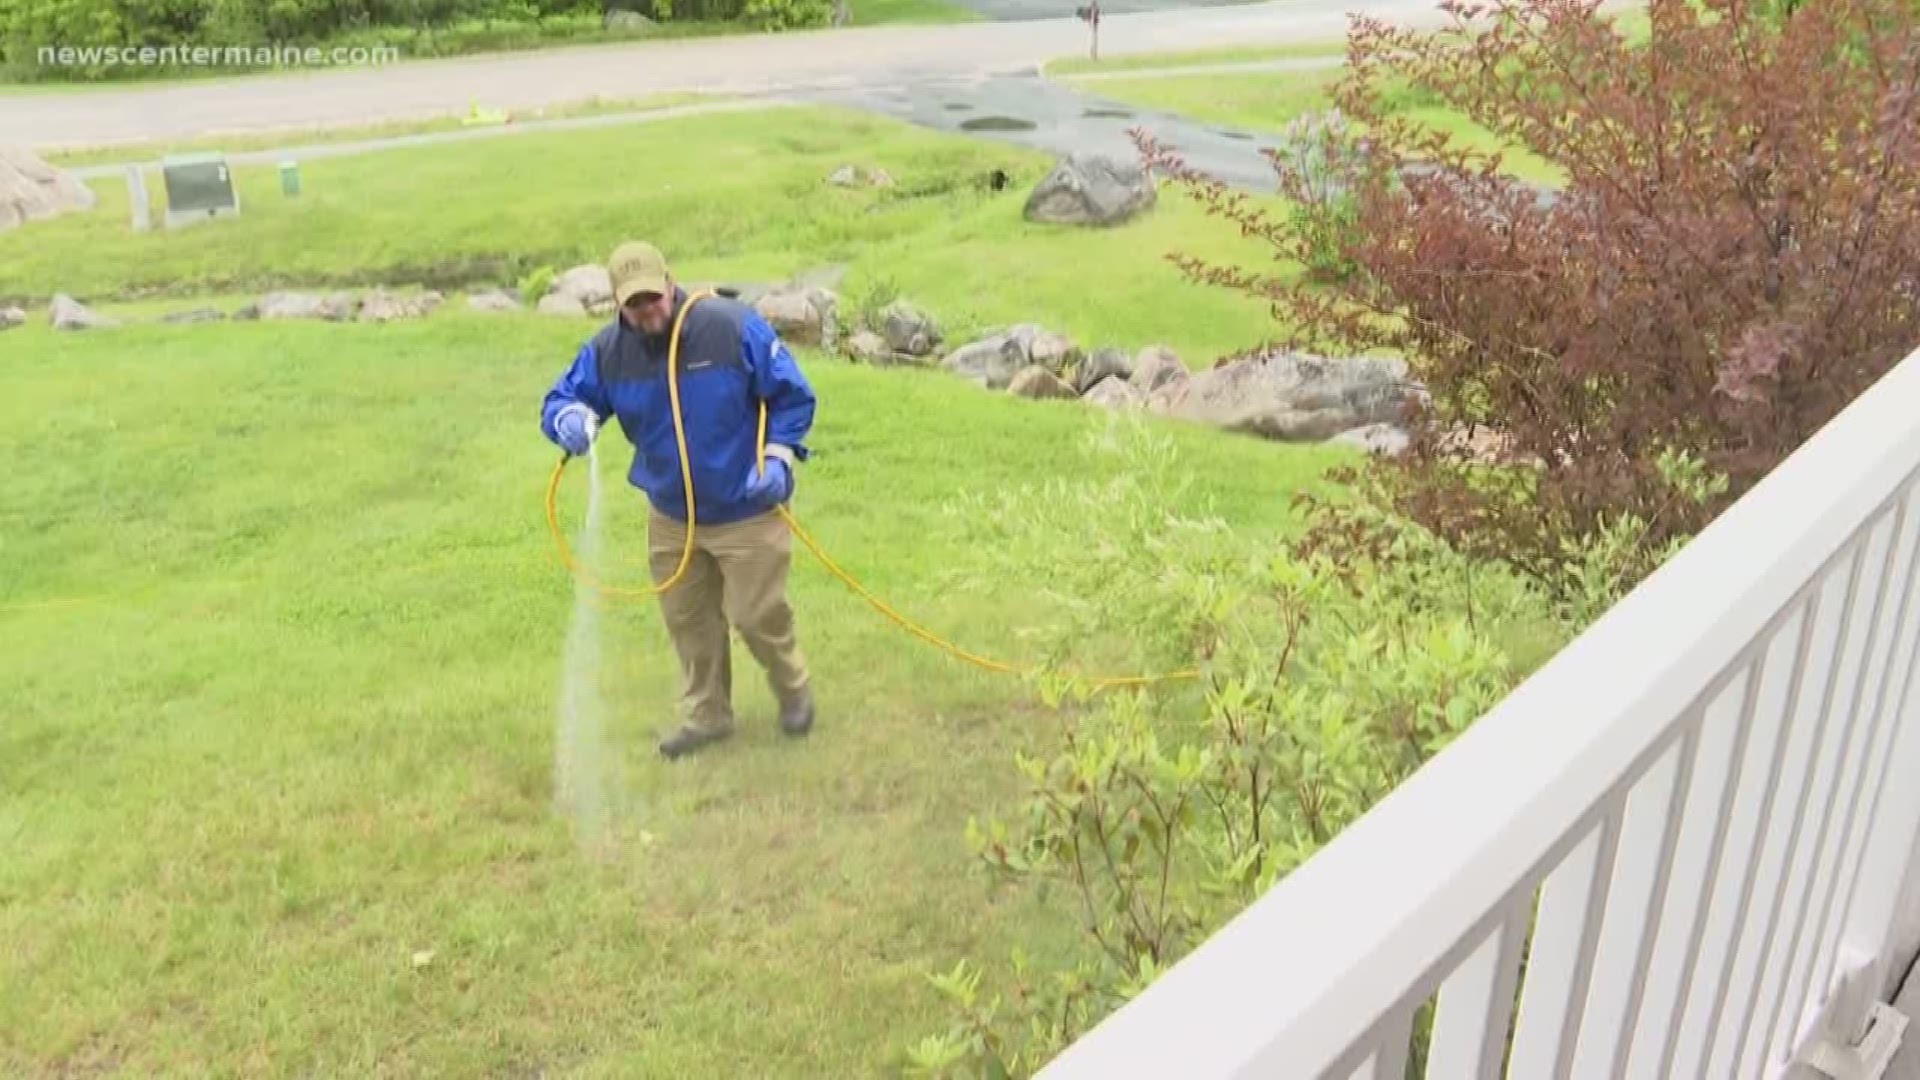 Companies in Maine are taking to the outdoors to help protect families from tick-borne diseases.